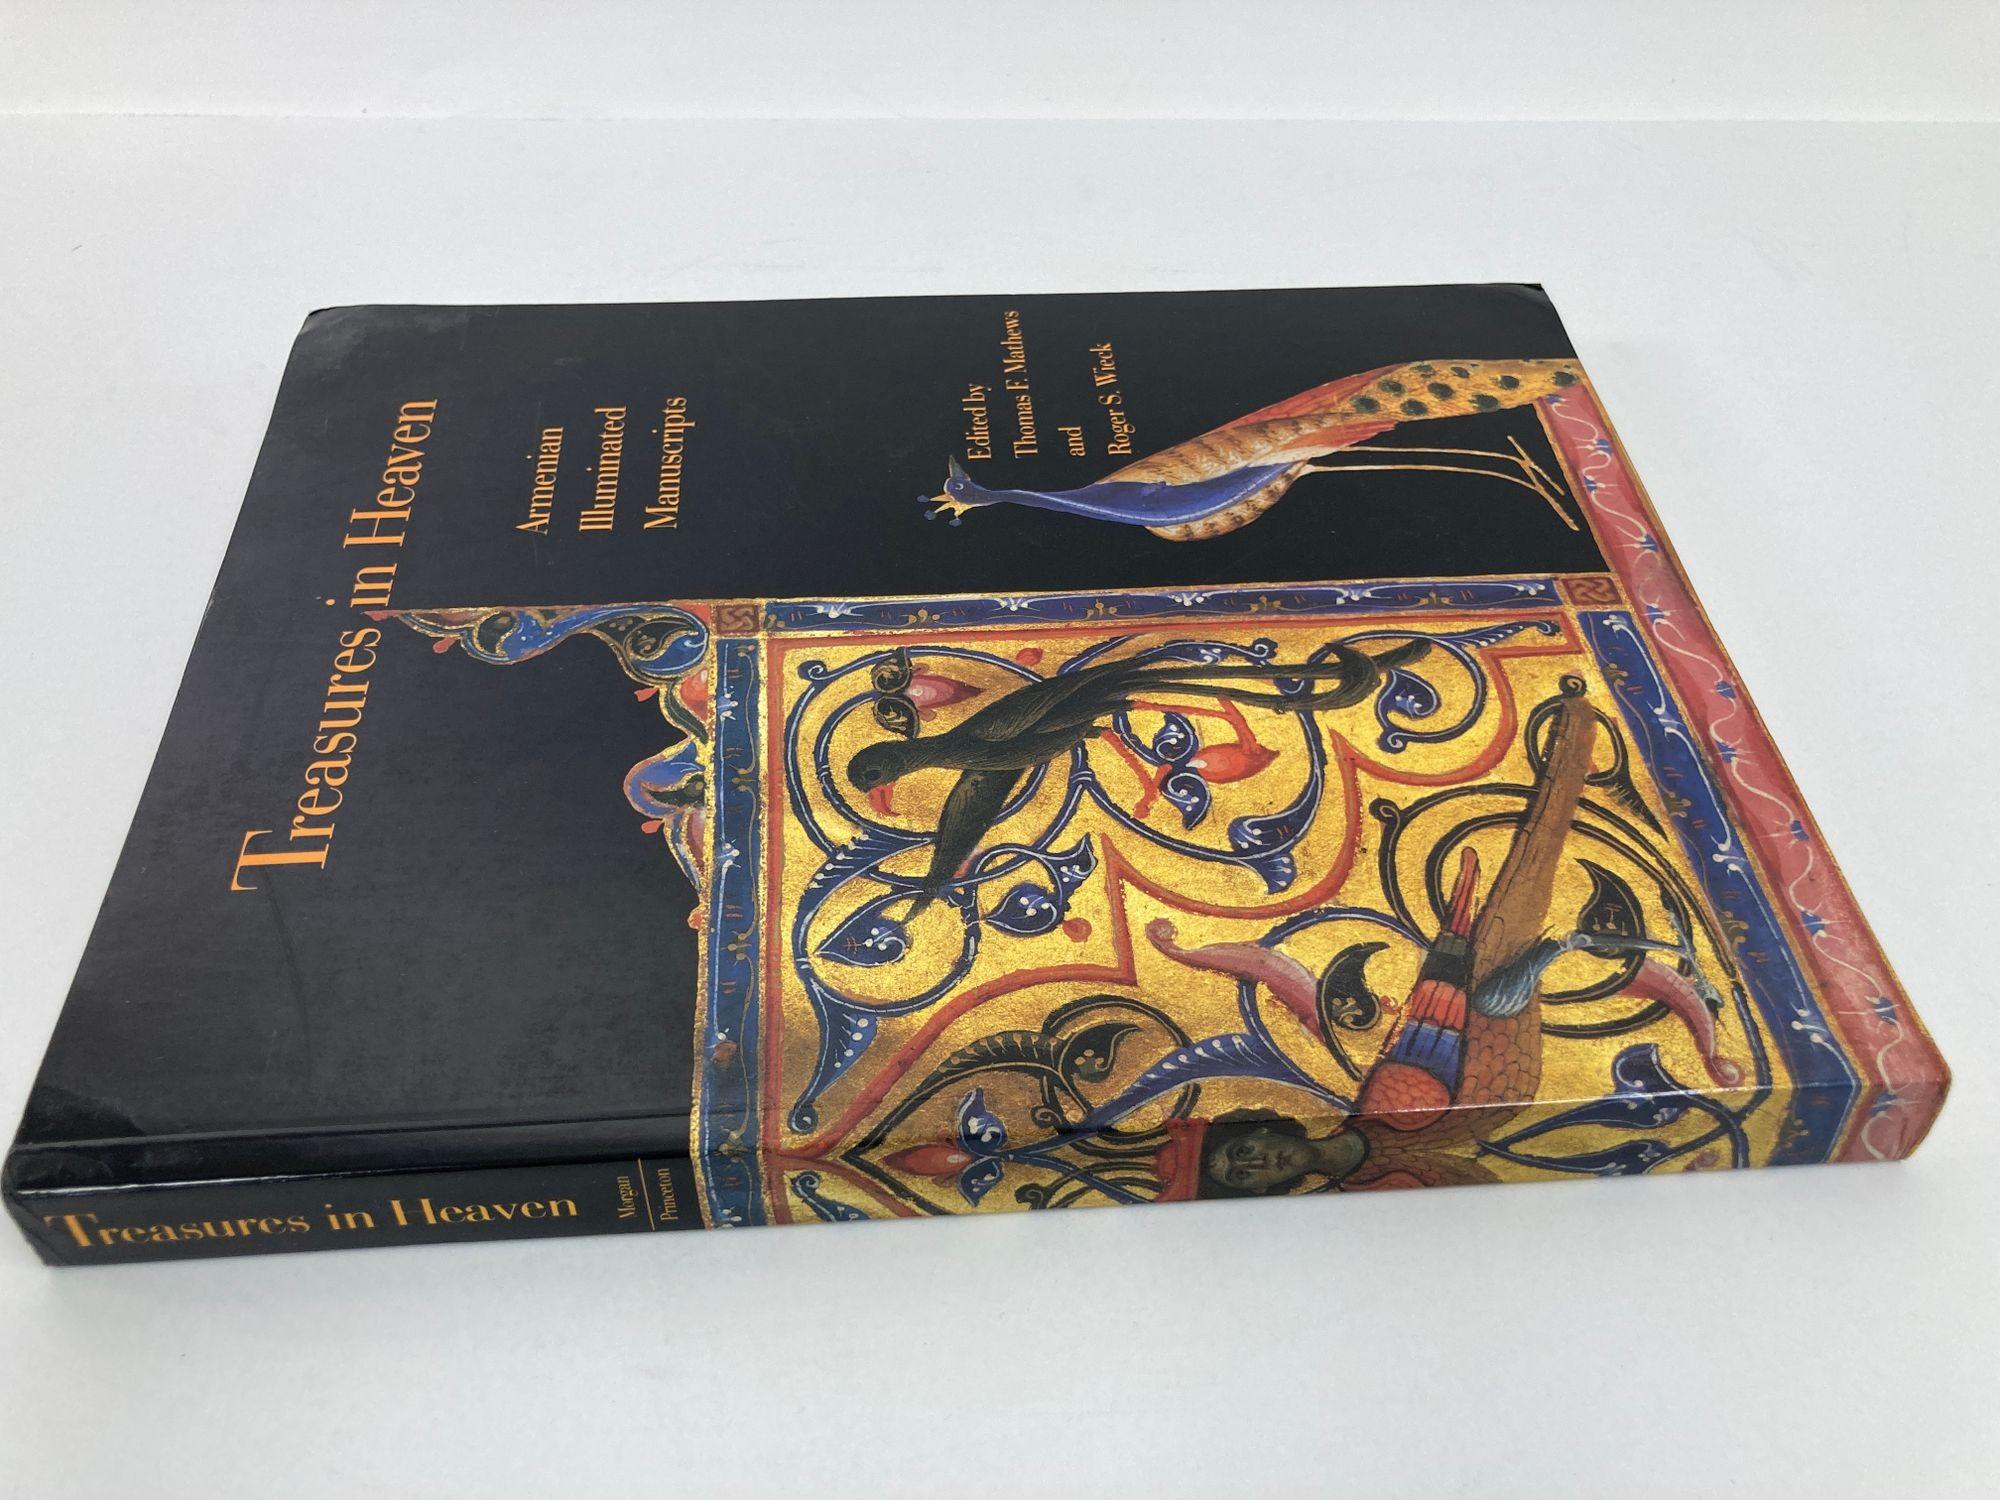 Treasures in Heaven: Armenian Illuminated Manuscripts Softcover Book 1994.
by Thomas F. Mathews, Roger S. Wieck Pierpont Morgan Library, 1994
For over a thousand years the pre-eminent expression of Armenian culture was the illuminated